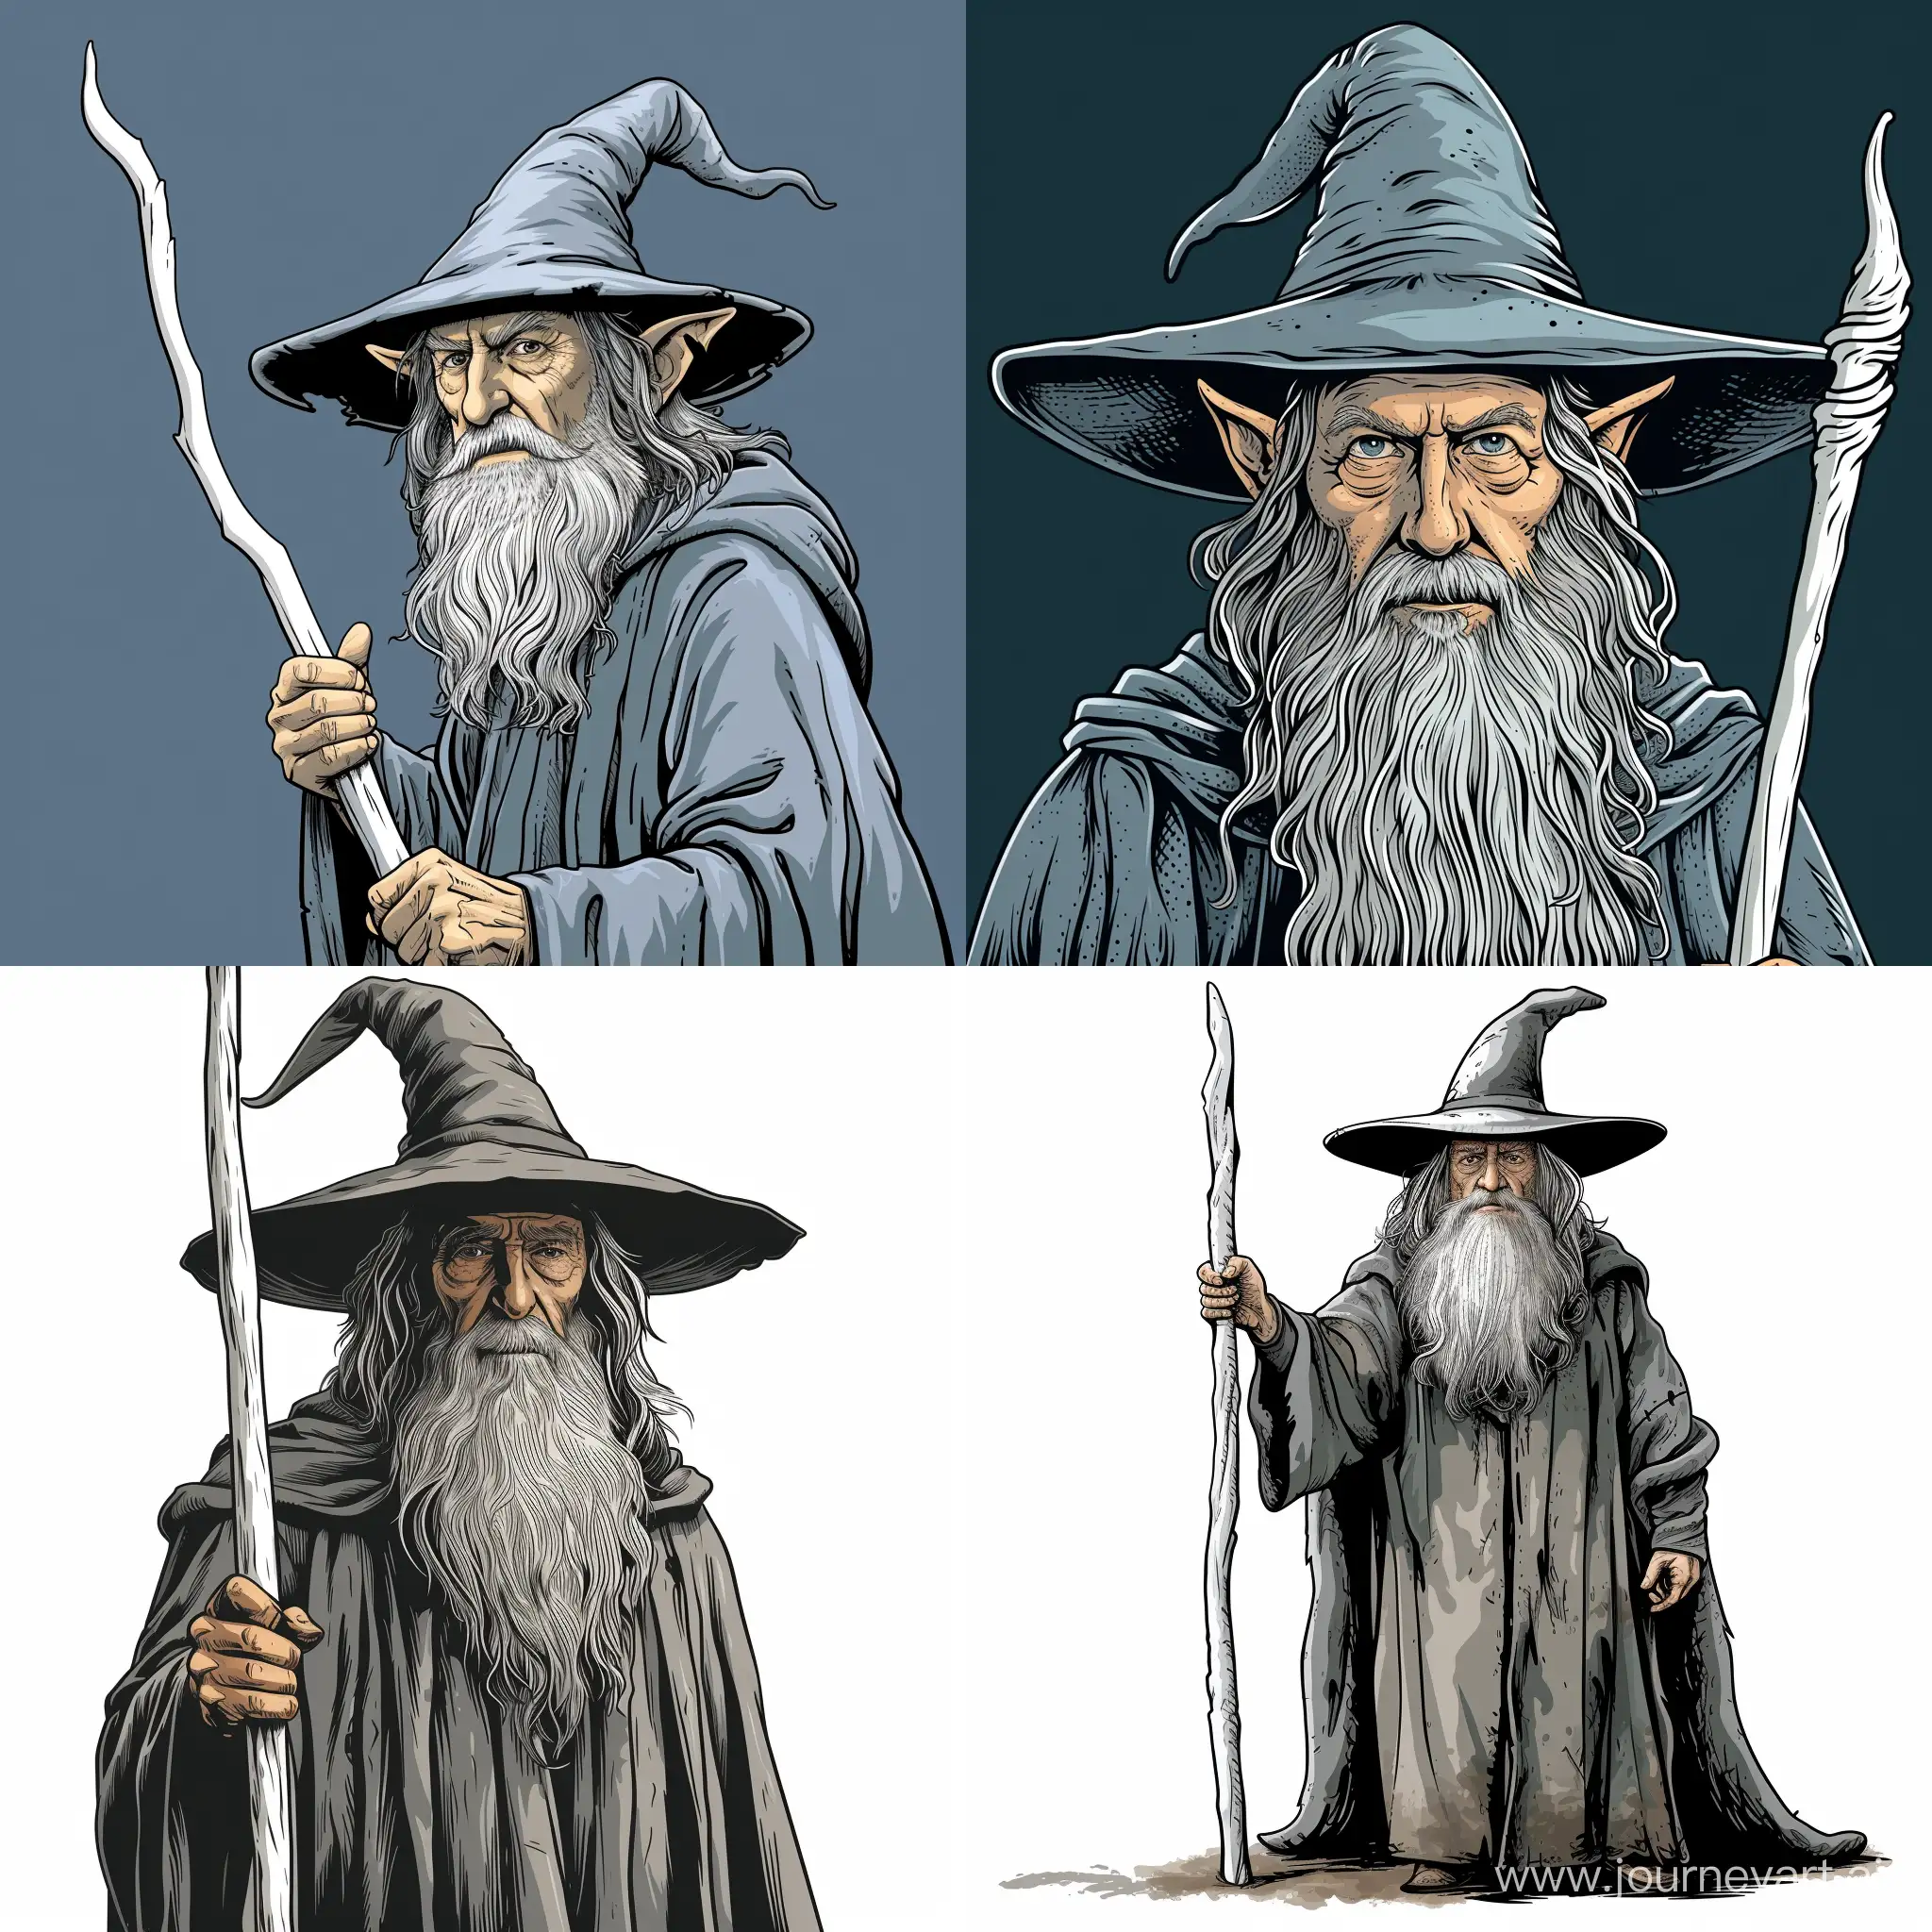 Gandalf-the-Grey-with-Pointed-Hat-and-White-Staff-in-Comic-Style